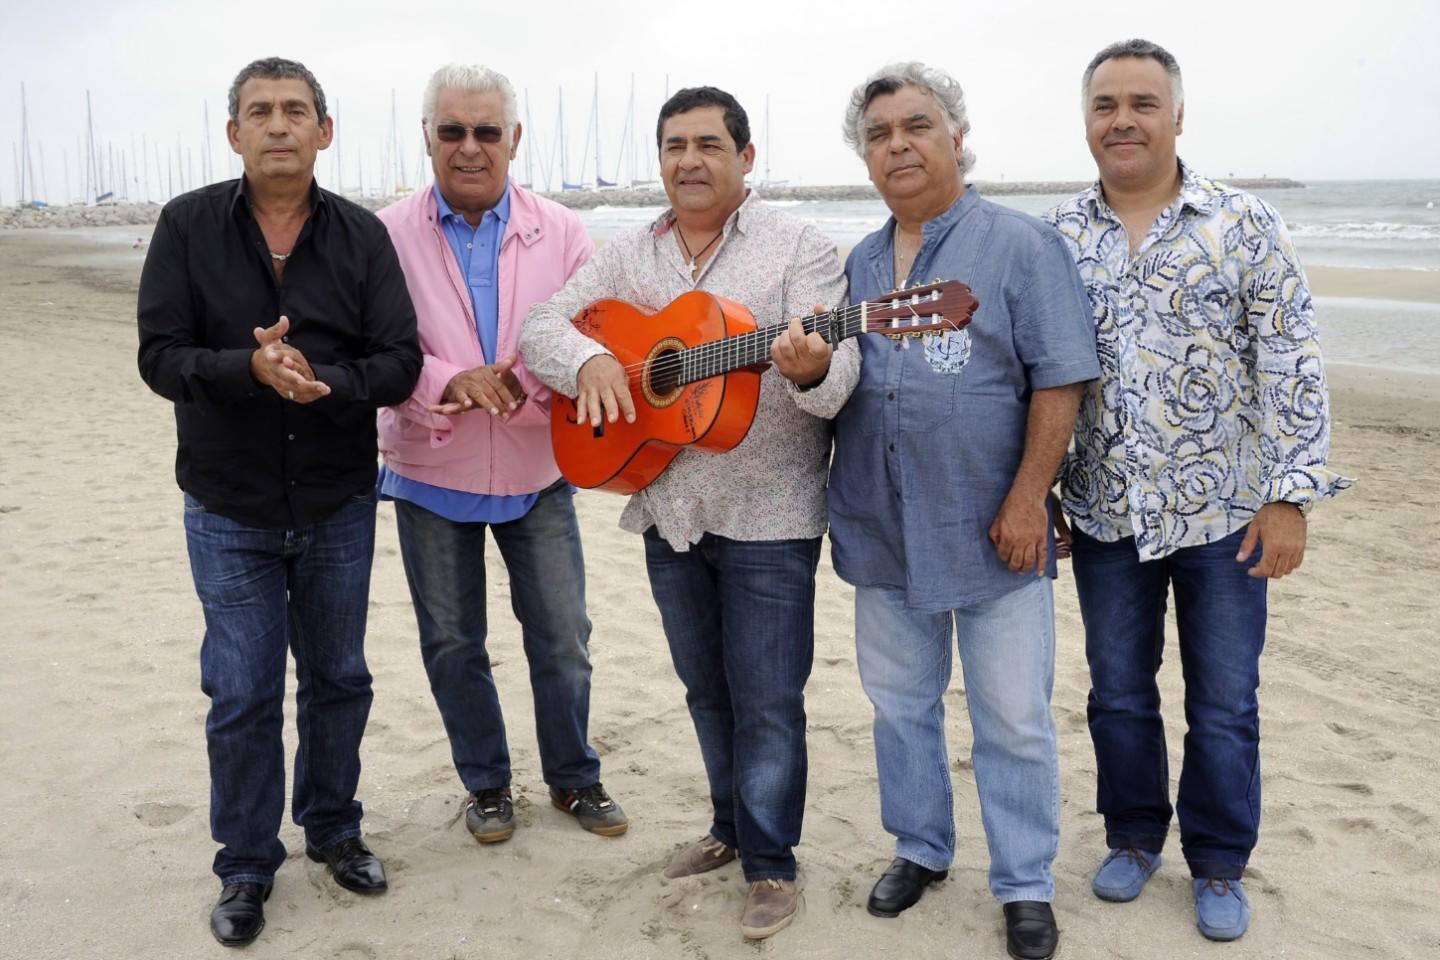 Gipsy Kings Tickets | Gipsy Kings Tour Dates 2023 and Concert Tickets ...